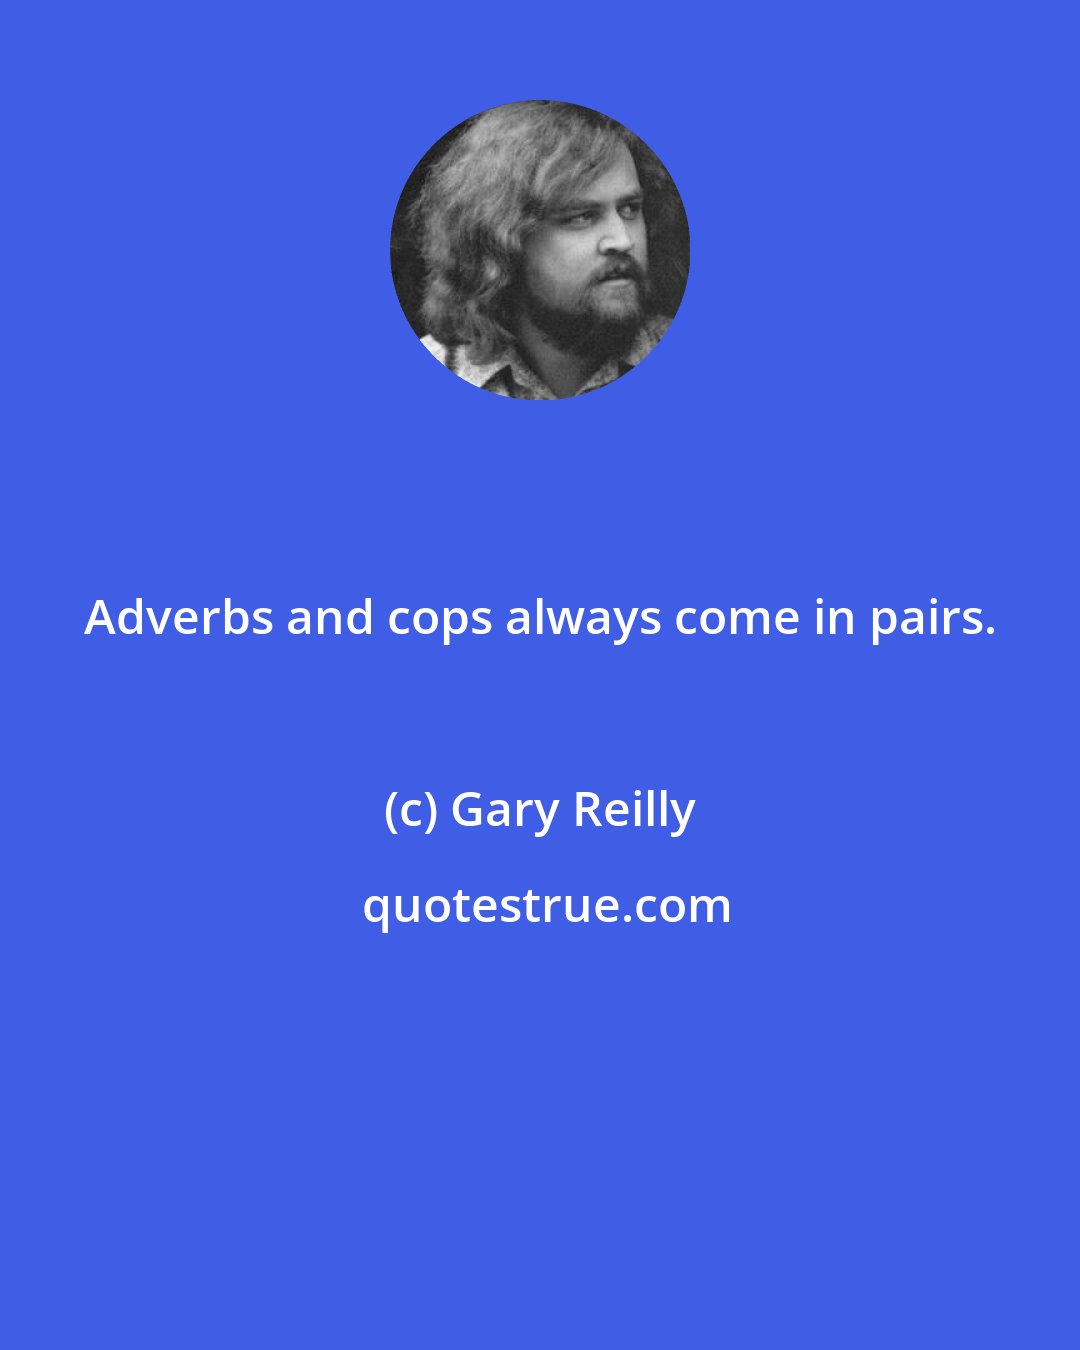 Gary Reilly: Adverbs and cops always come in pairs.